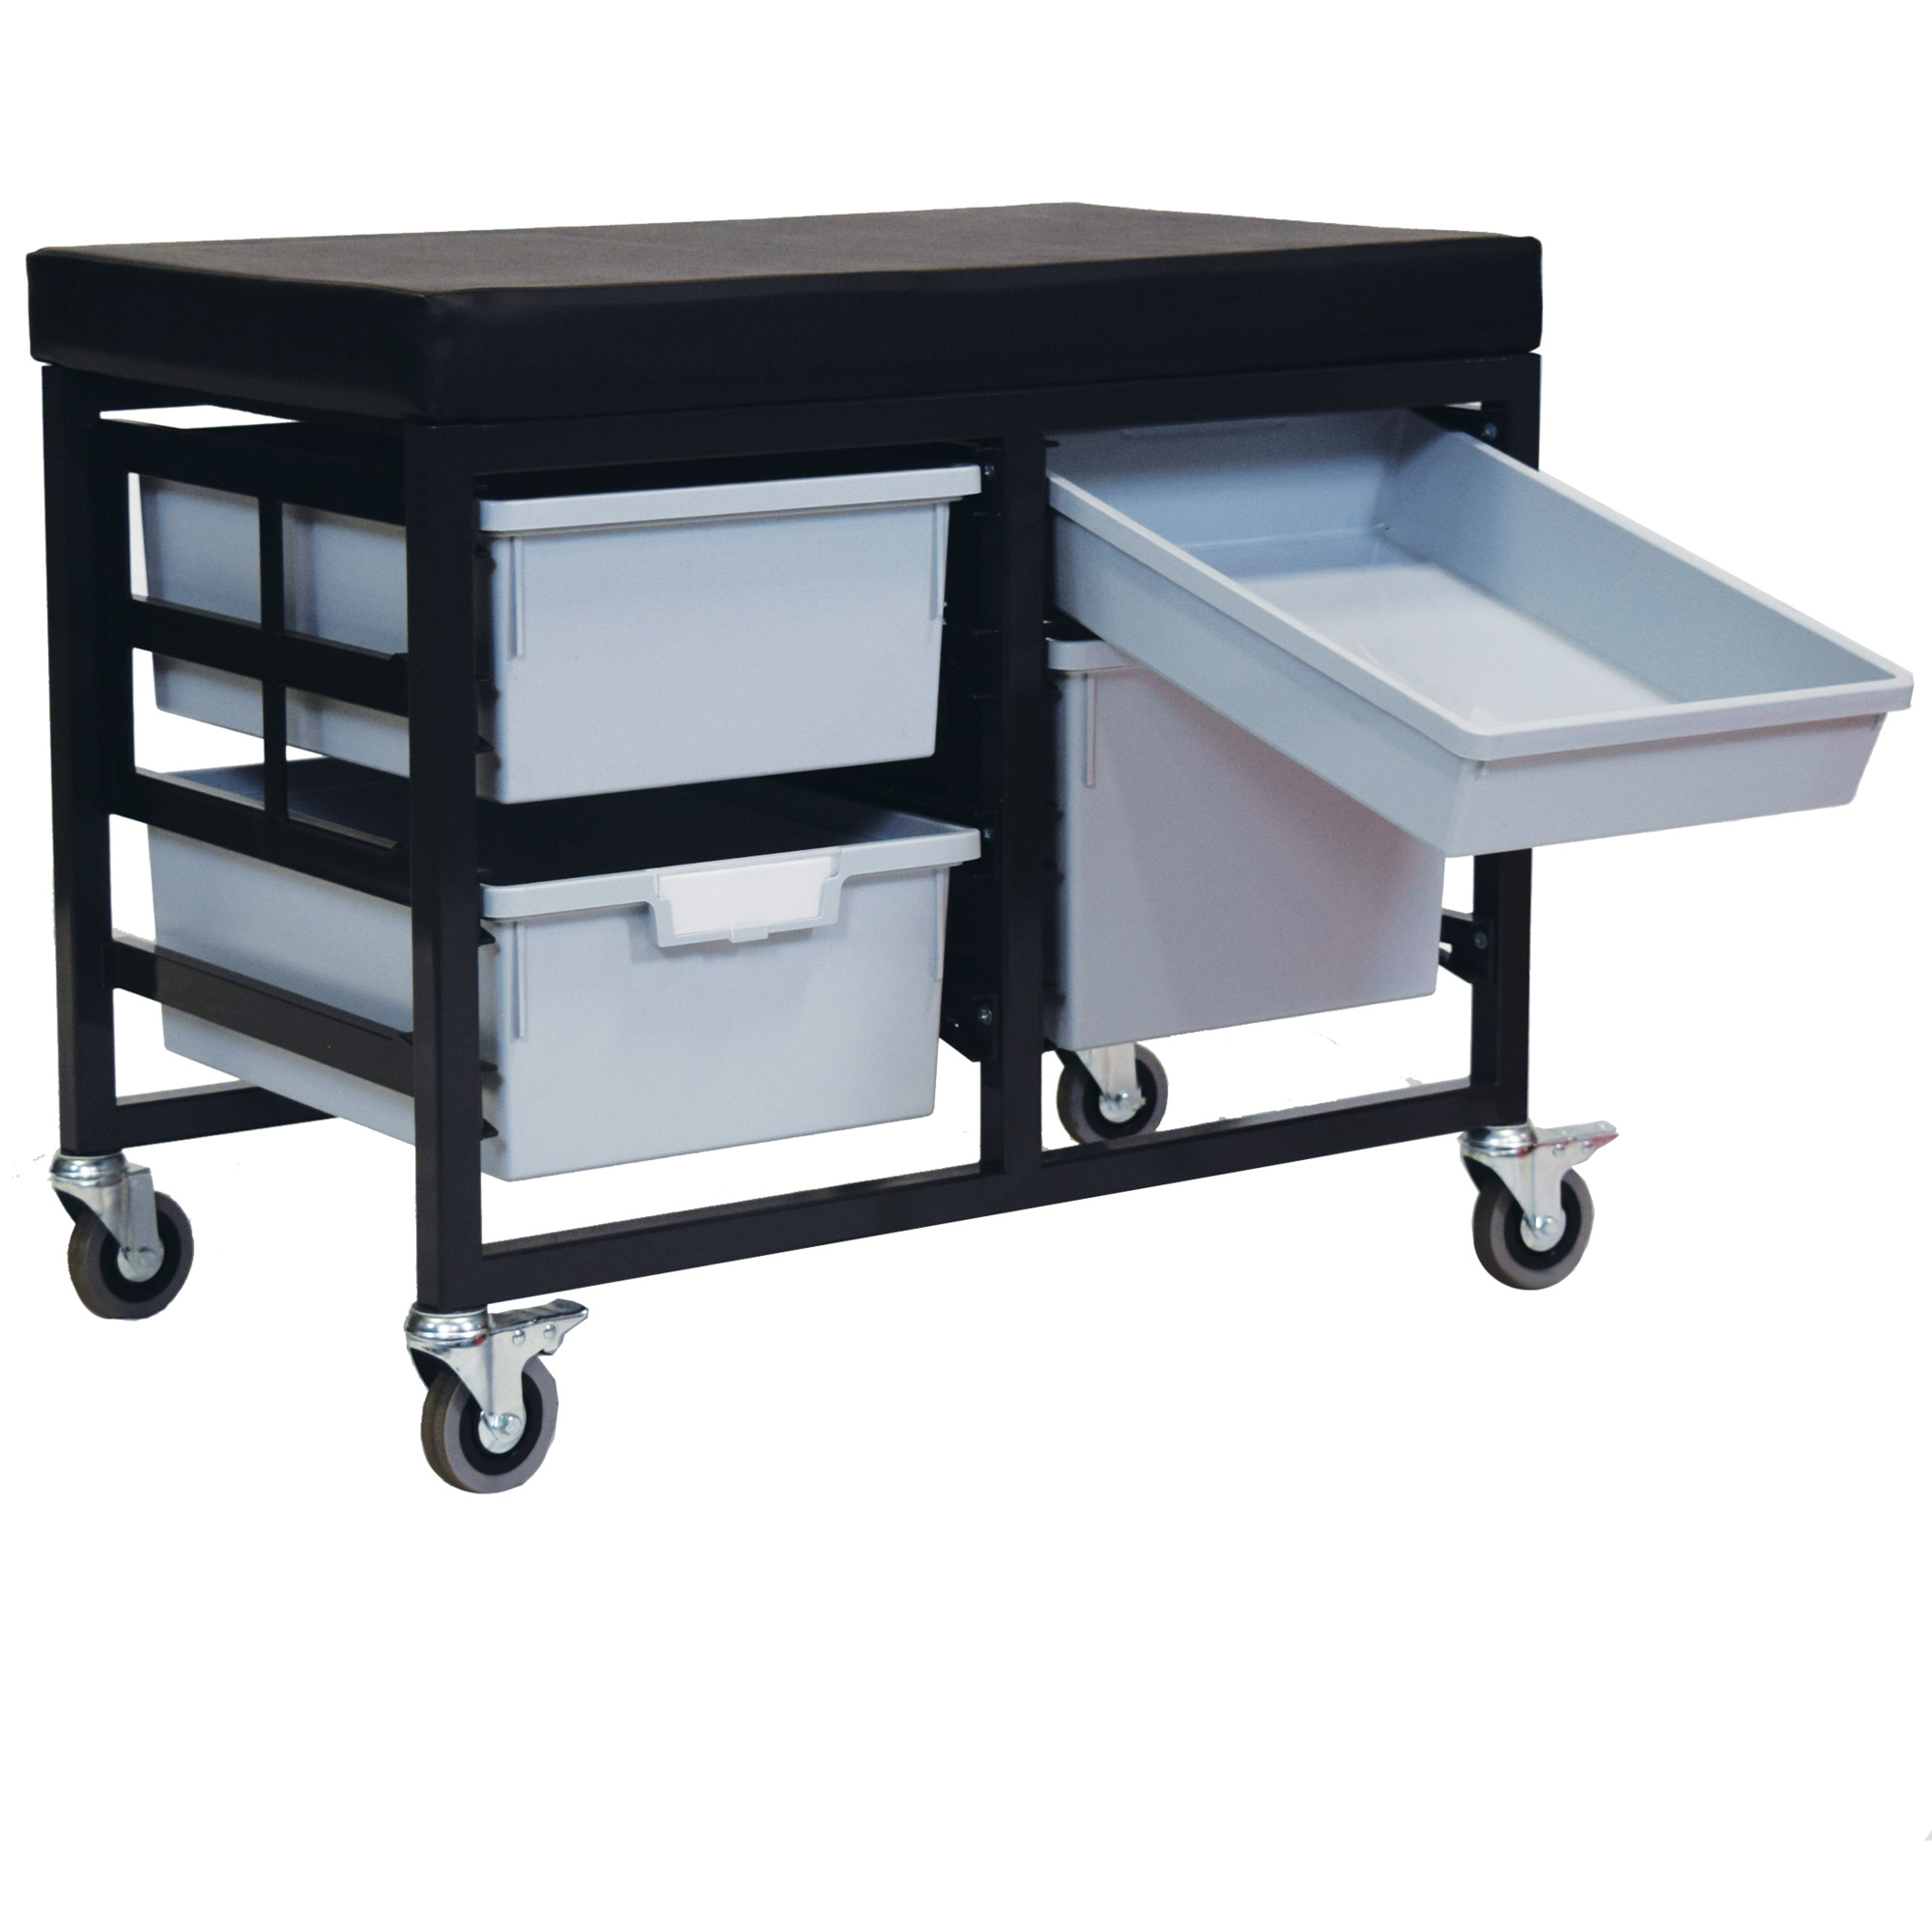 Certwood StorWerks, StorBenchSeat w/ 4 Storsystem Trays and Bins-Gray, Included (qty.) 4, Material Plastic, Height 3 in, Model CE2109DGGC-1S2D1TLG